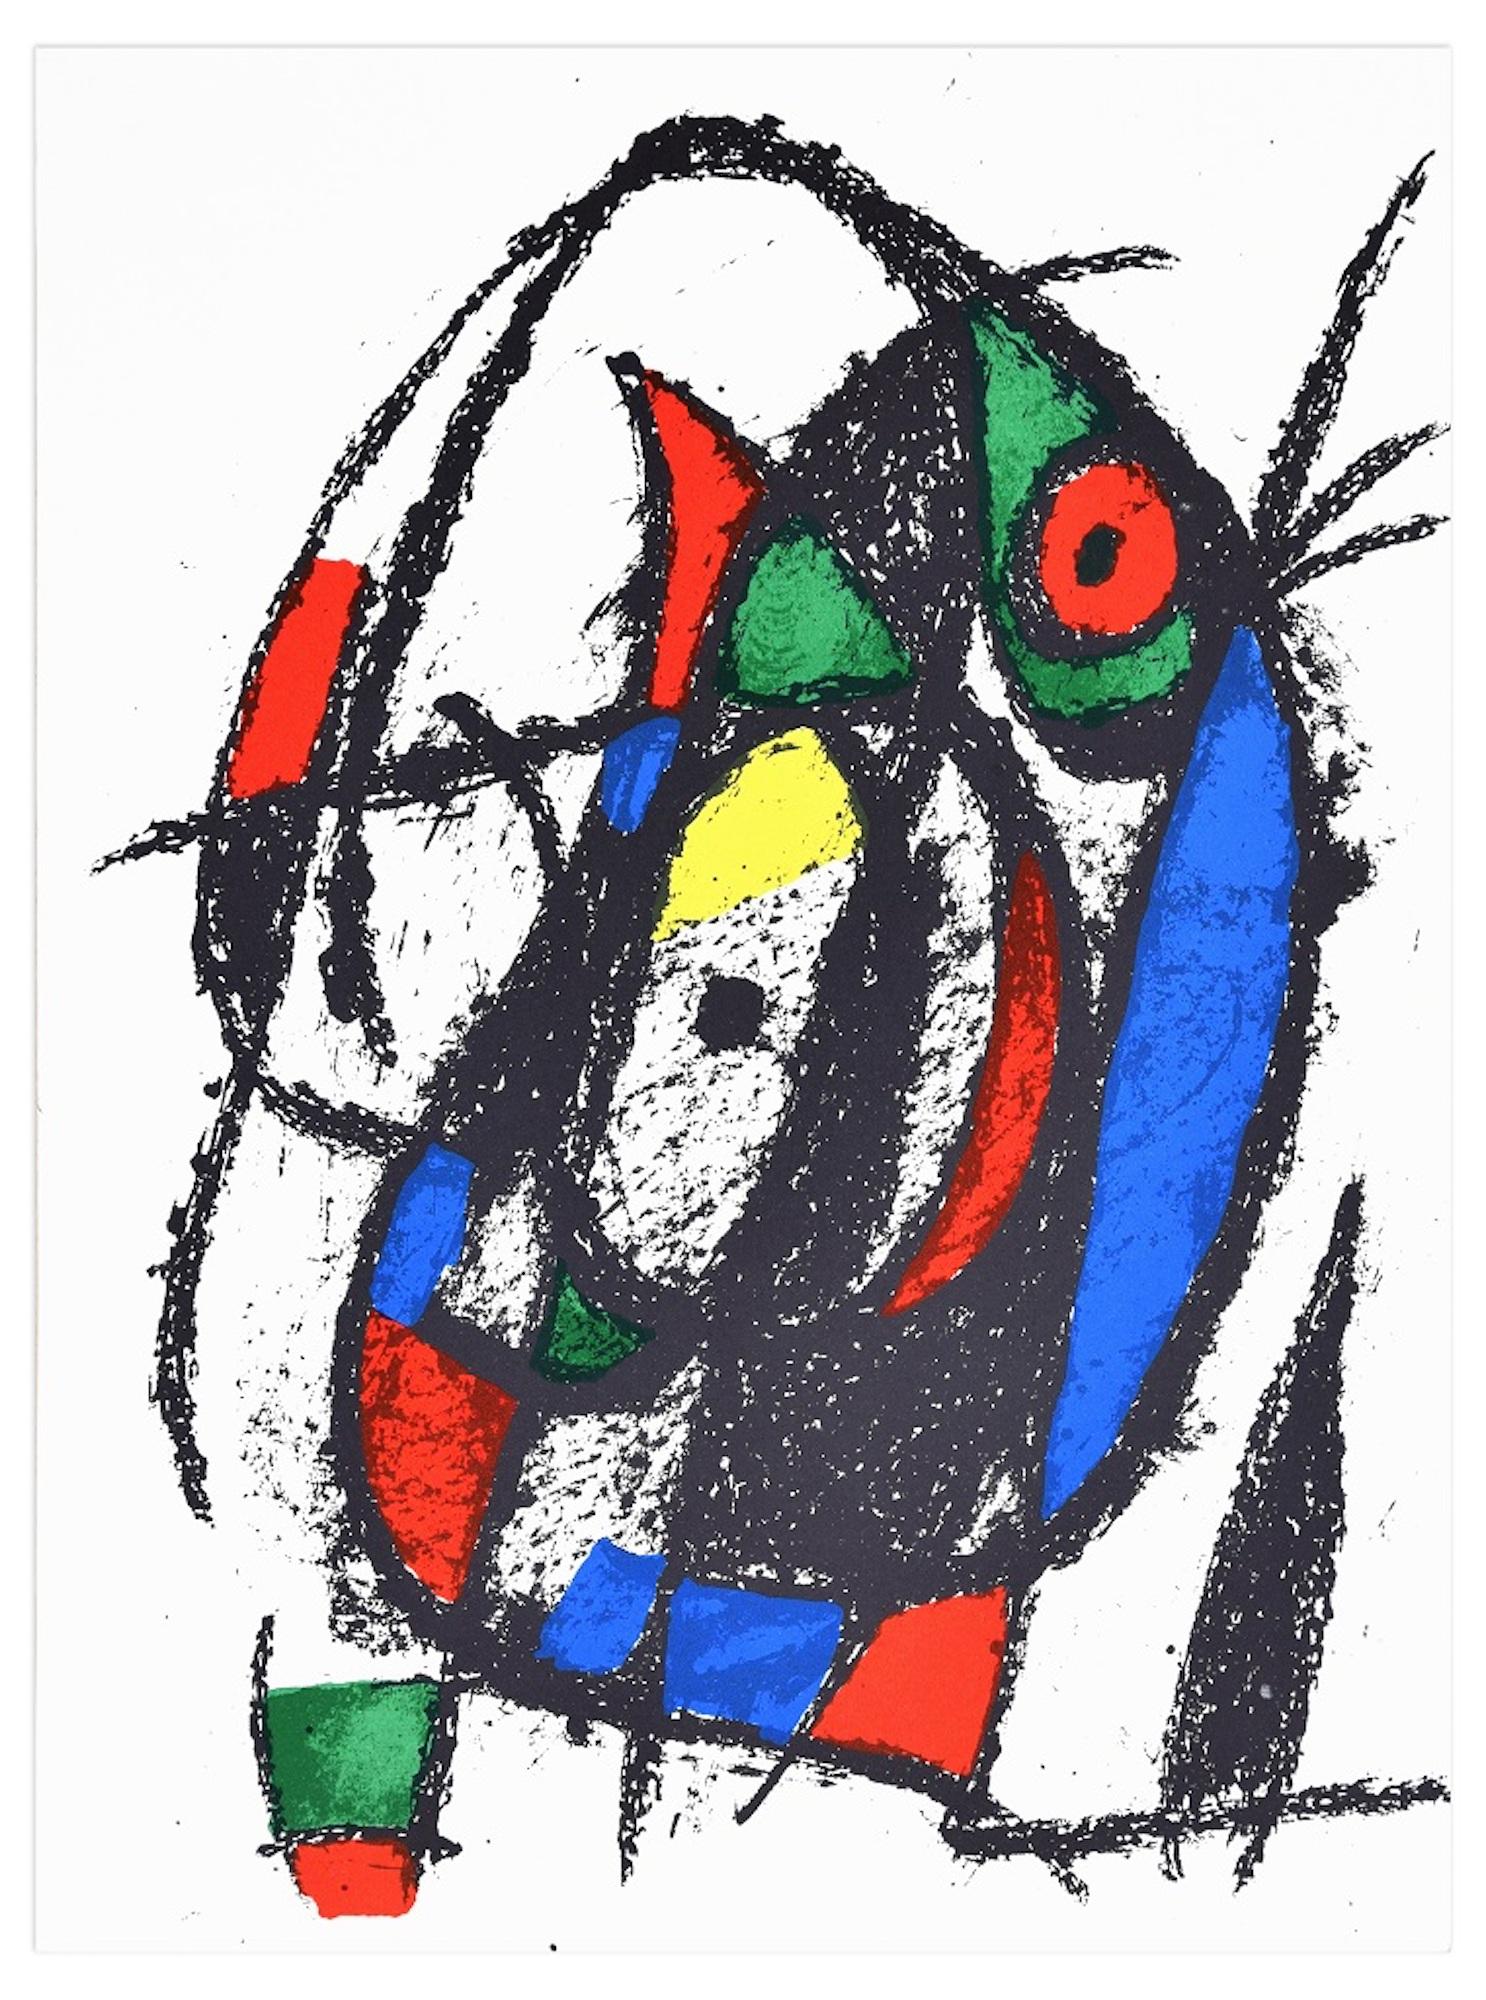 (after) Joan Miró Abstract Print - Composition - Original Lithograph by Joan Mirò - 1974